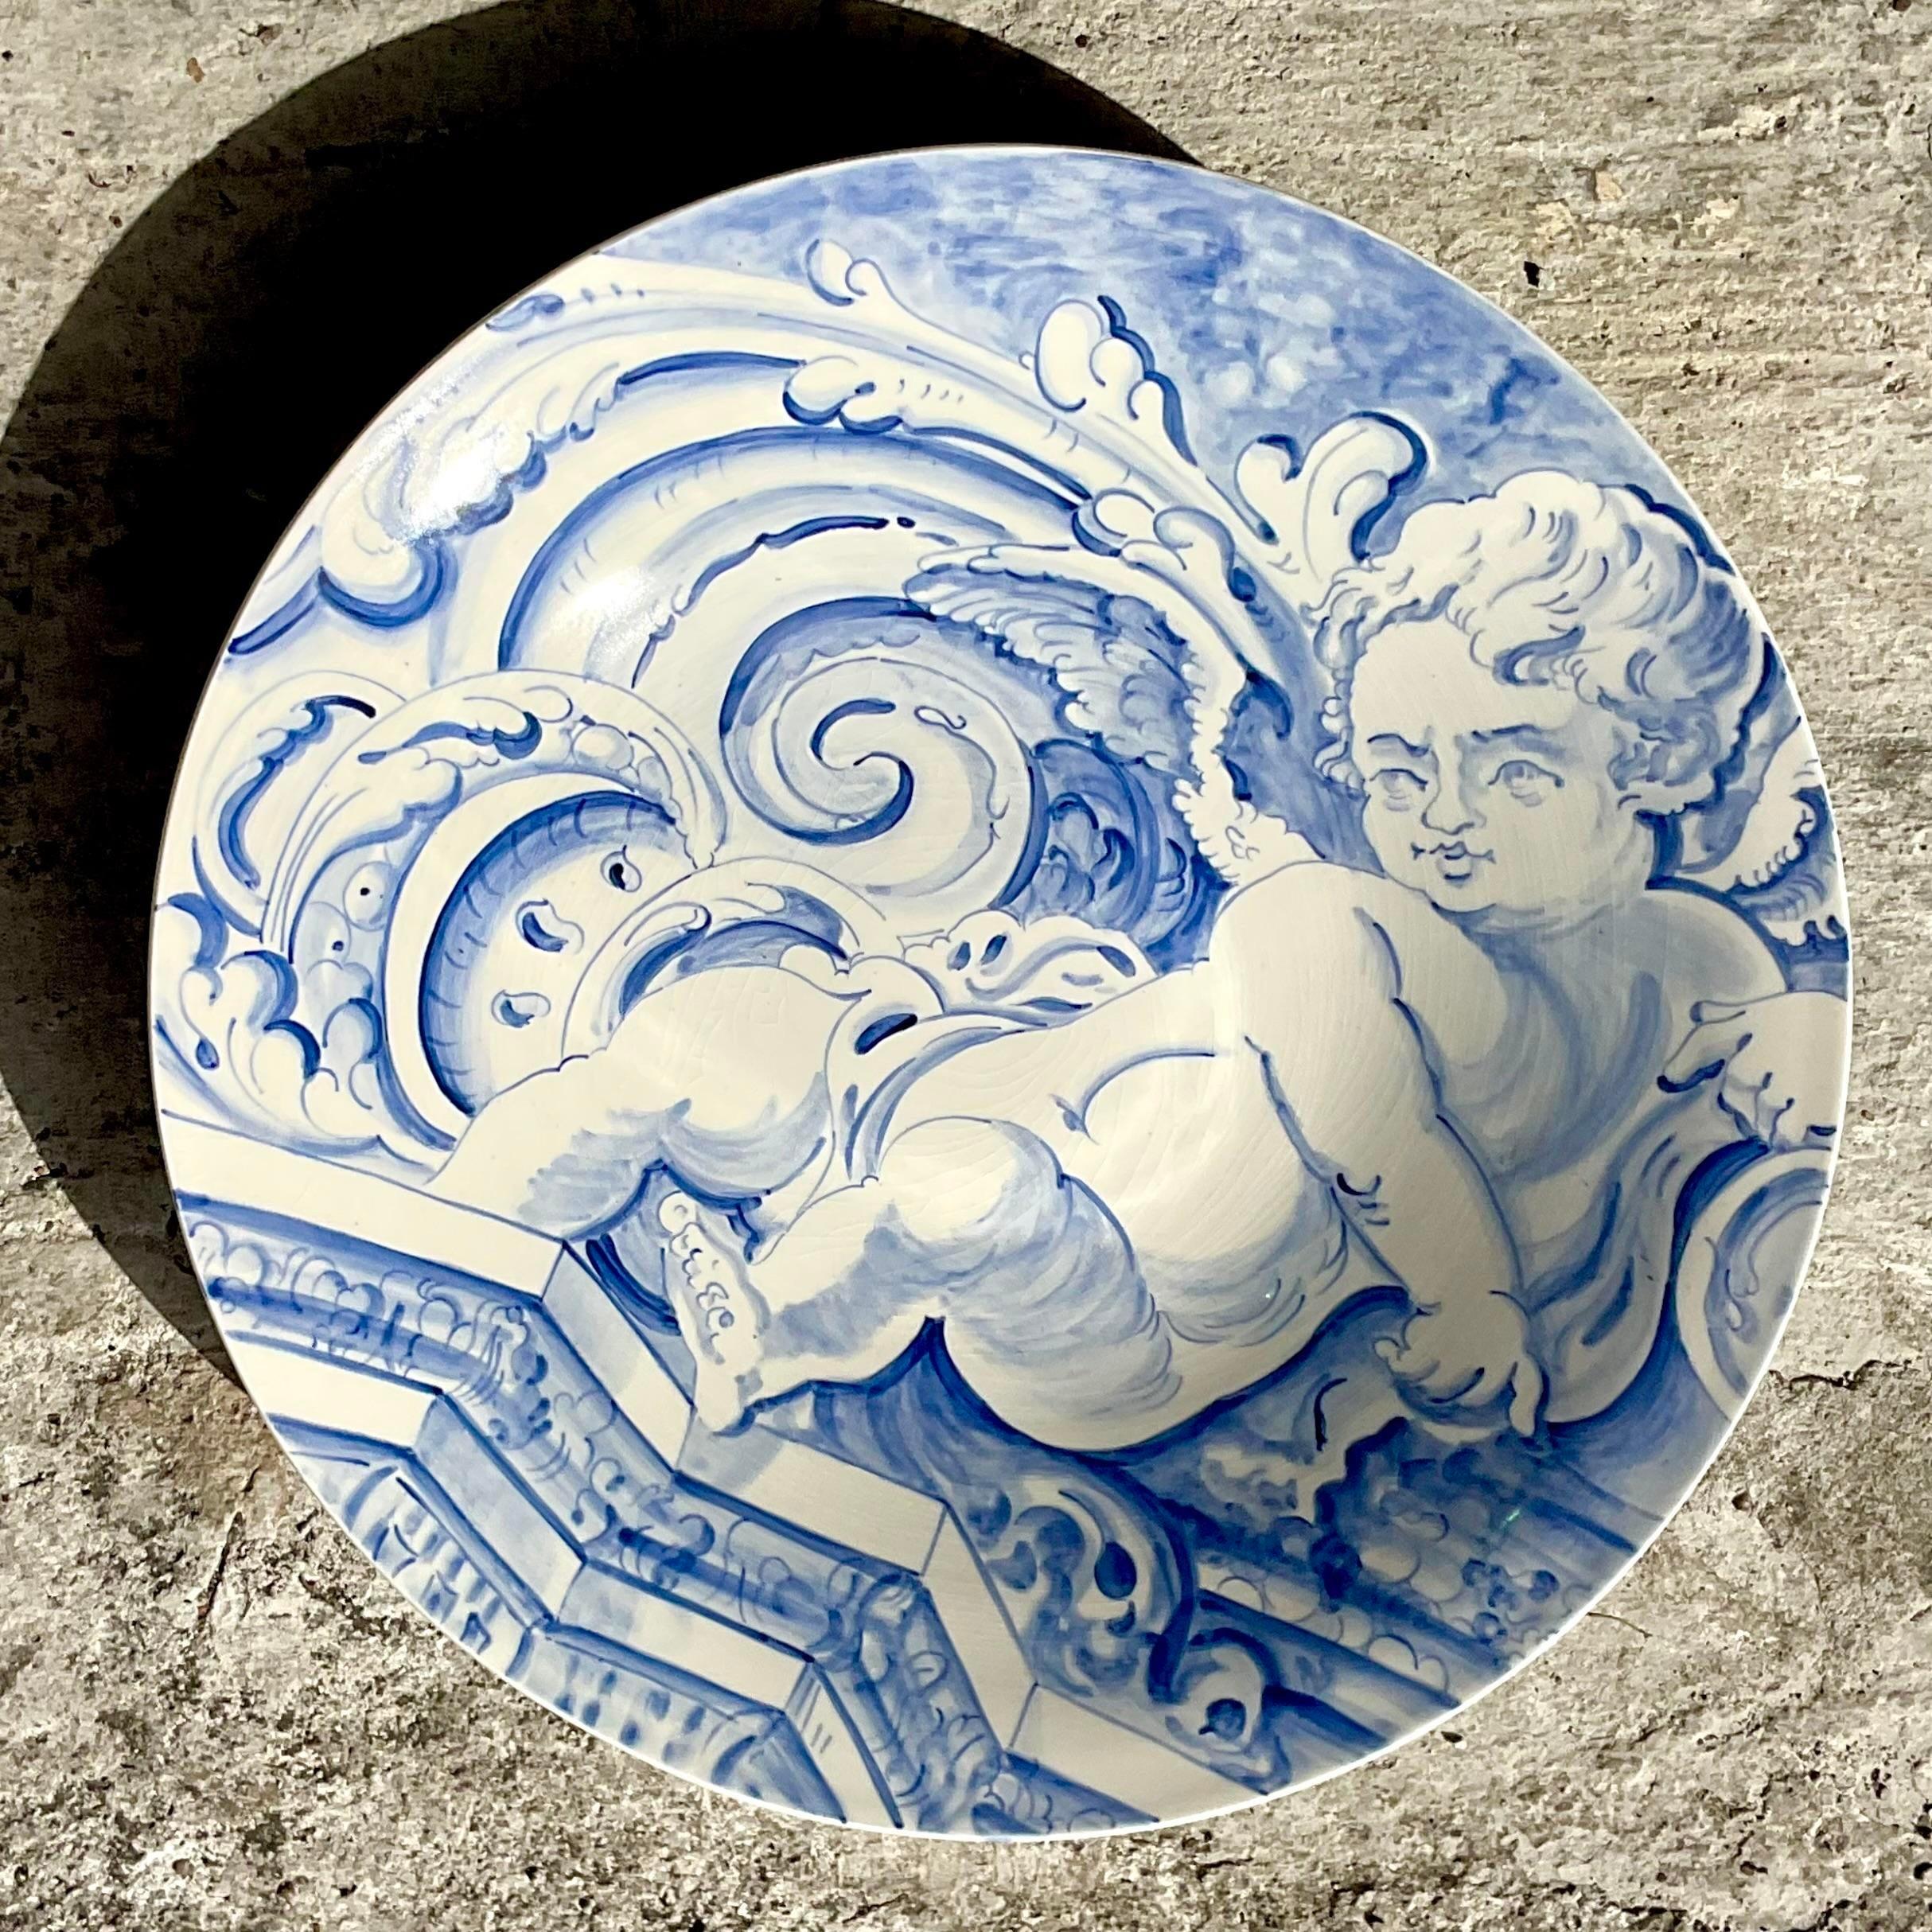 Vintage Regency Monumental Signed Robert Walters Blue and White Cherub Plate In Good Condition For Sale In west palm beach, FL